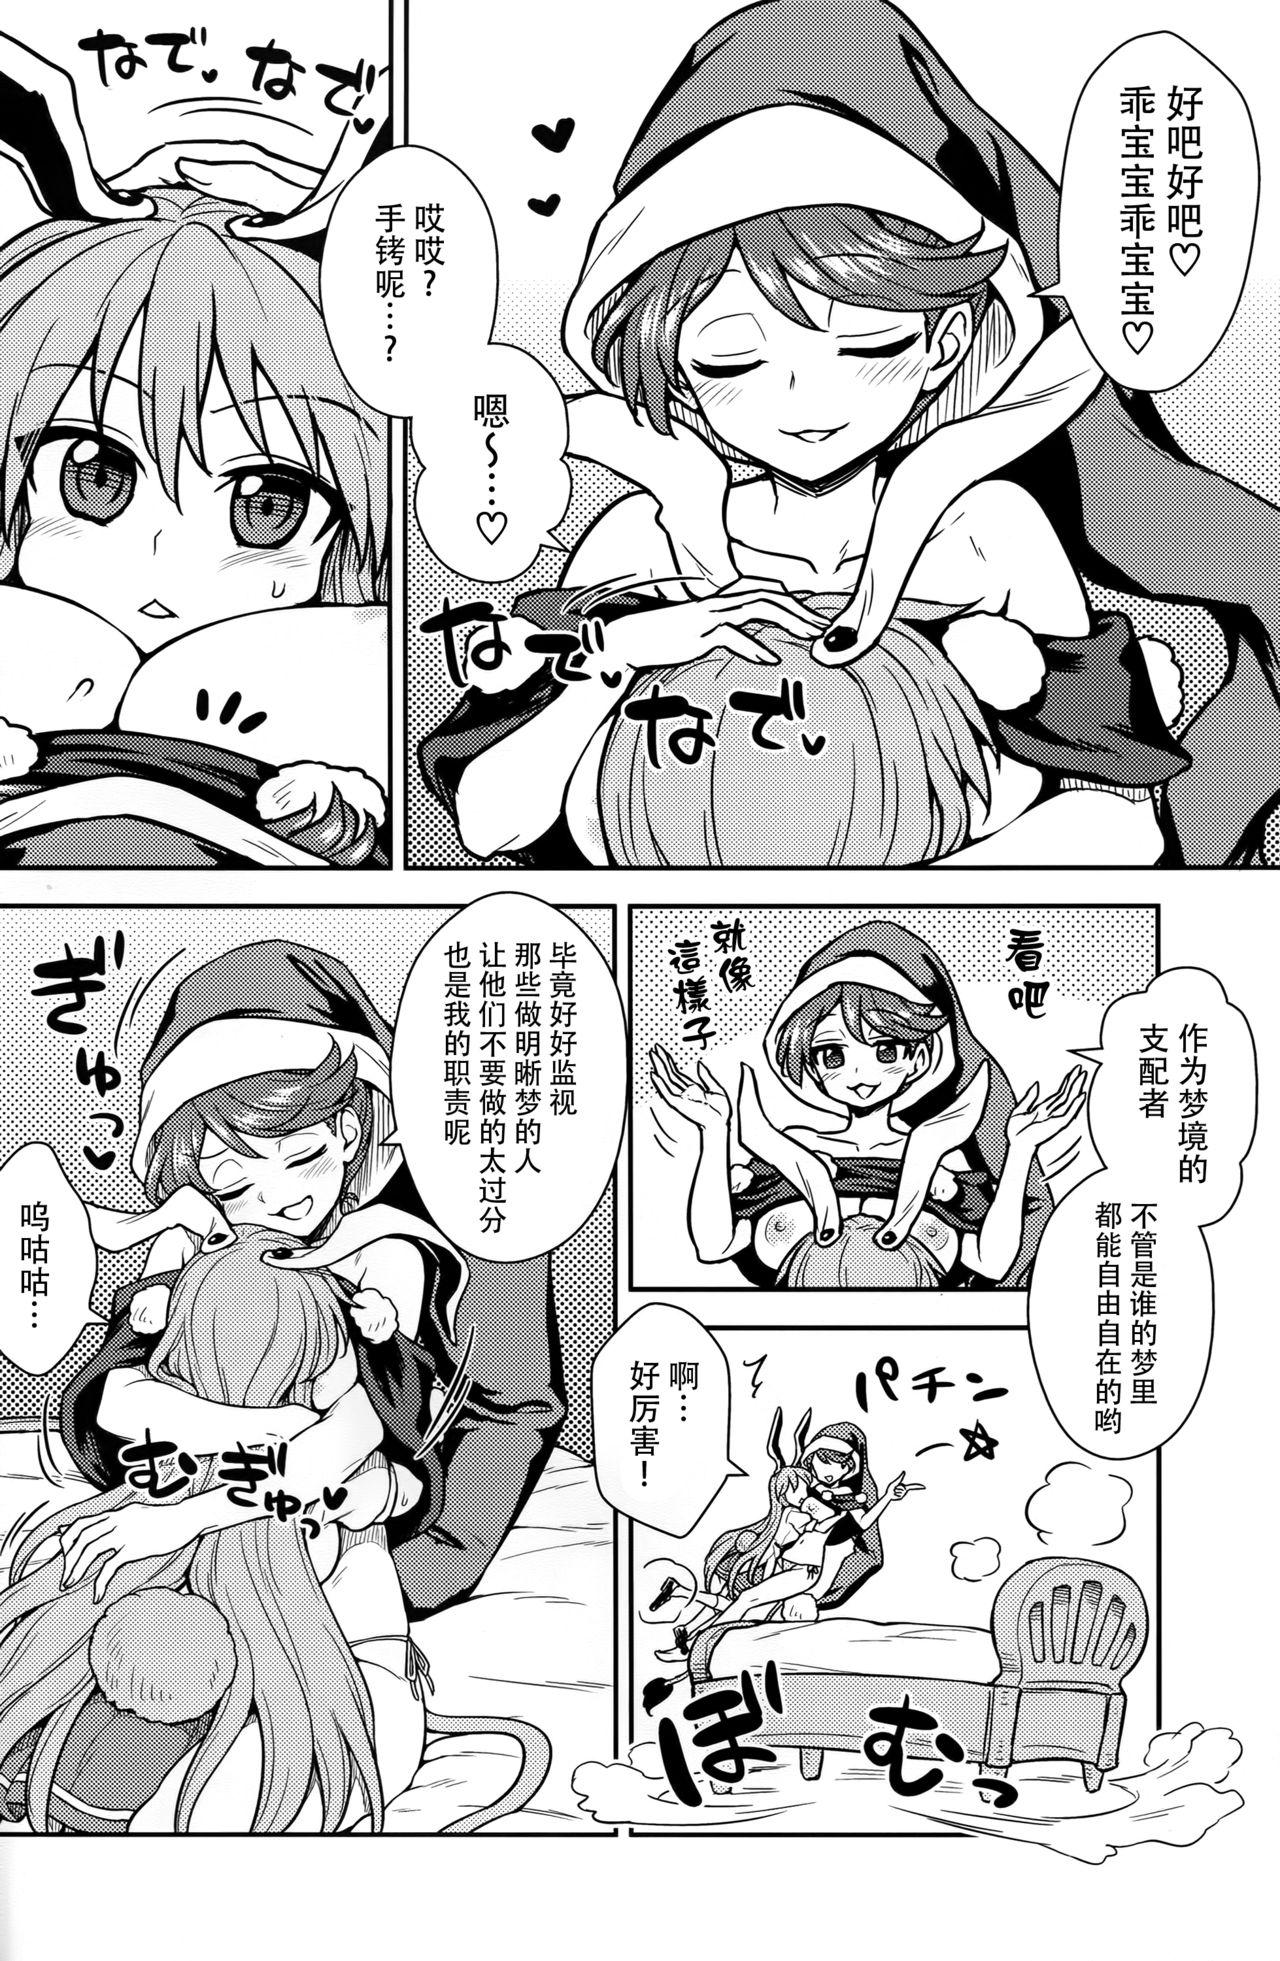 Goldenshower Doremy-san no Dream Therapy - Touhou project Teasing - Page 6